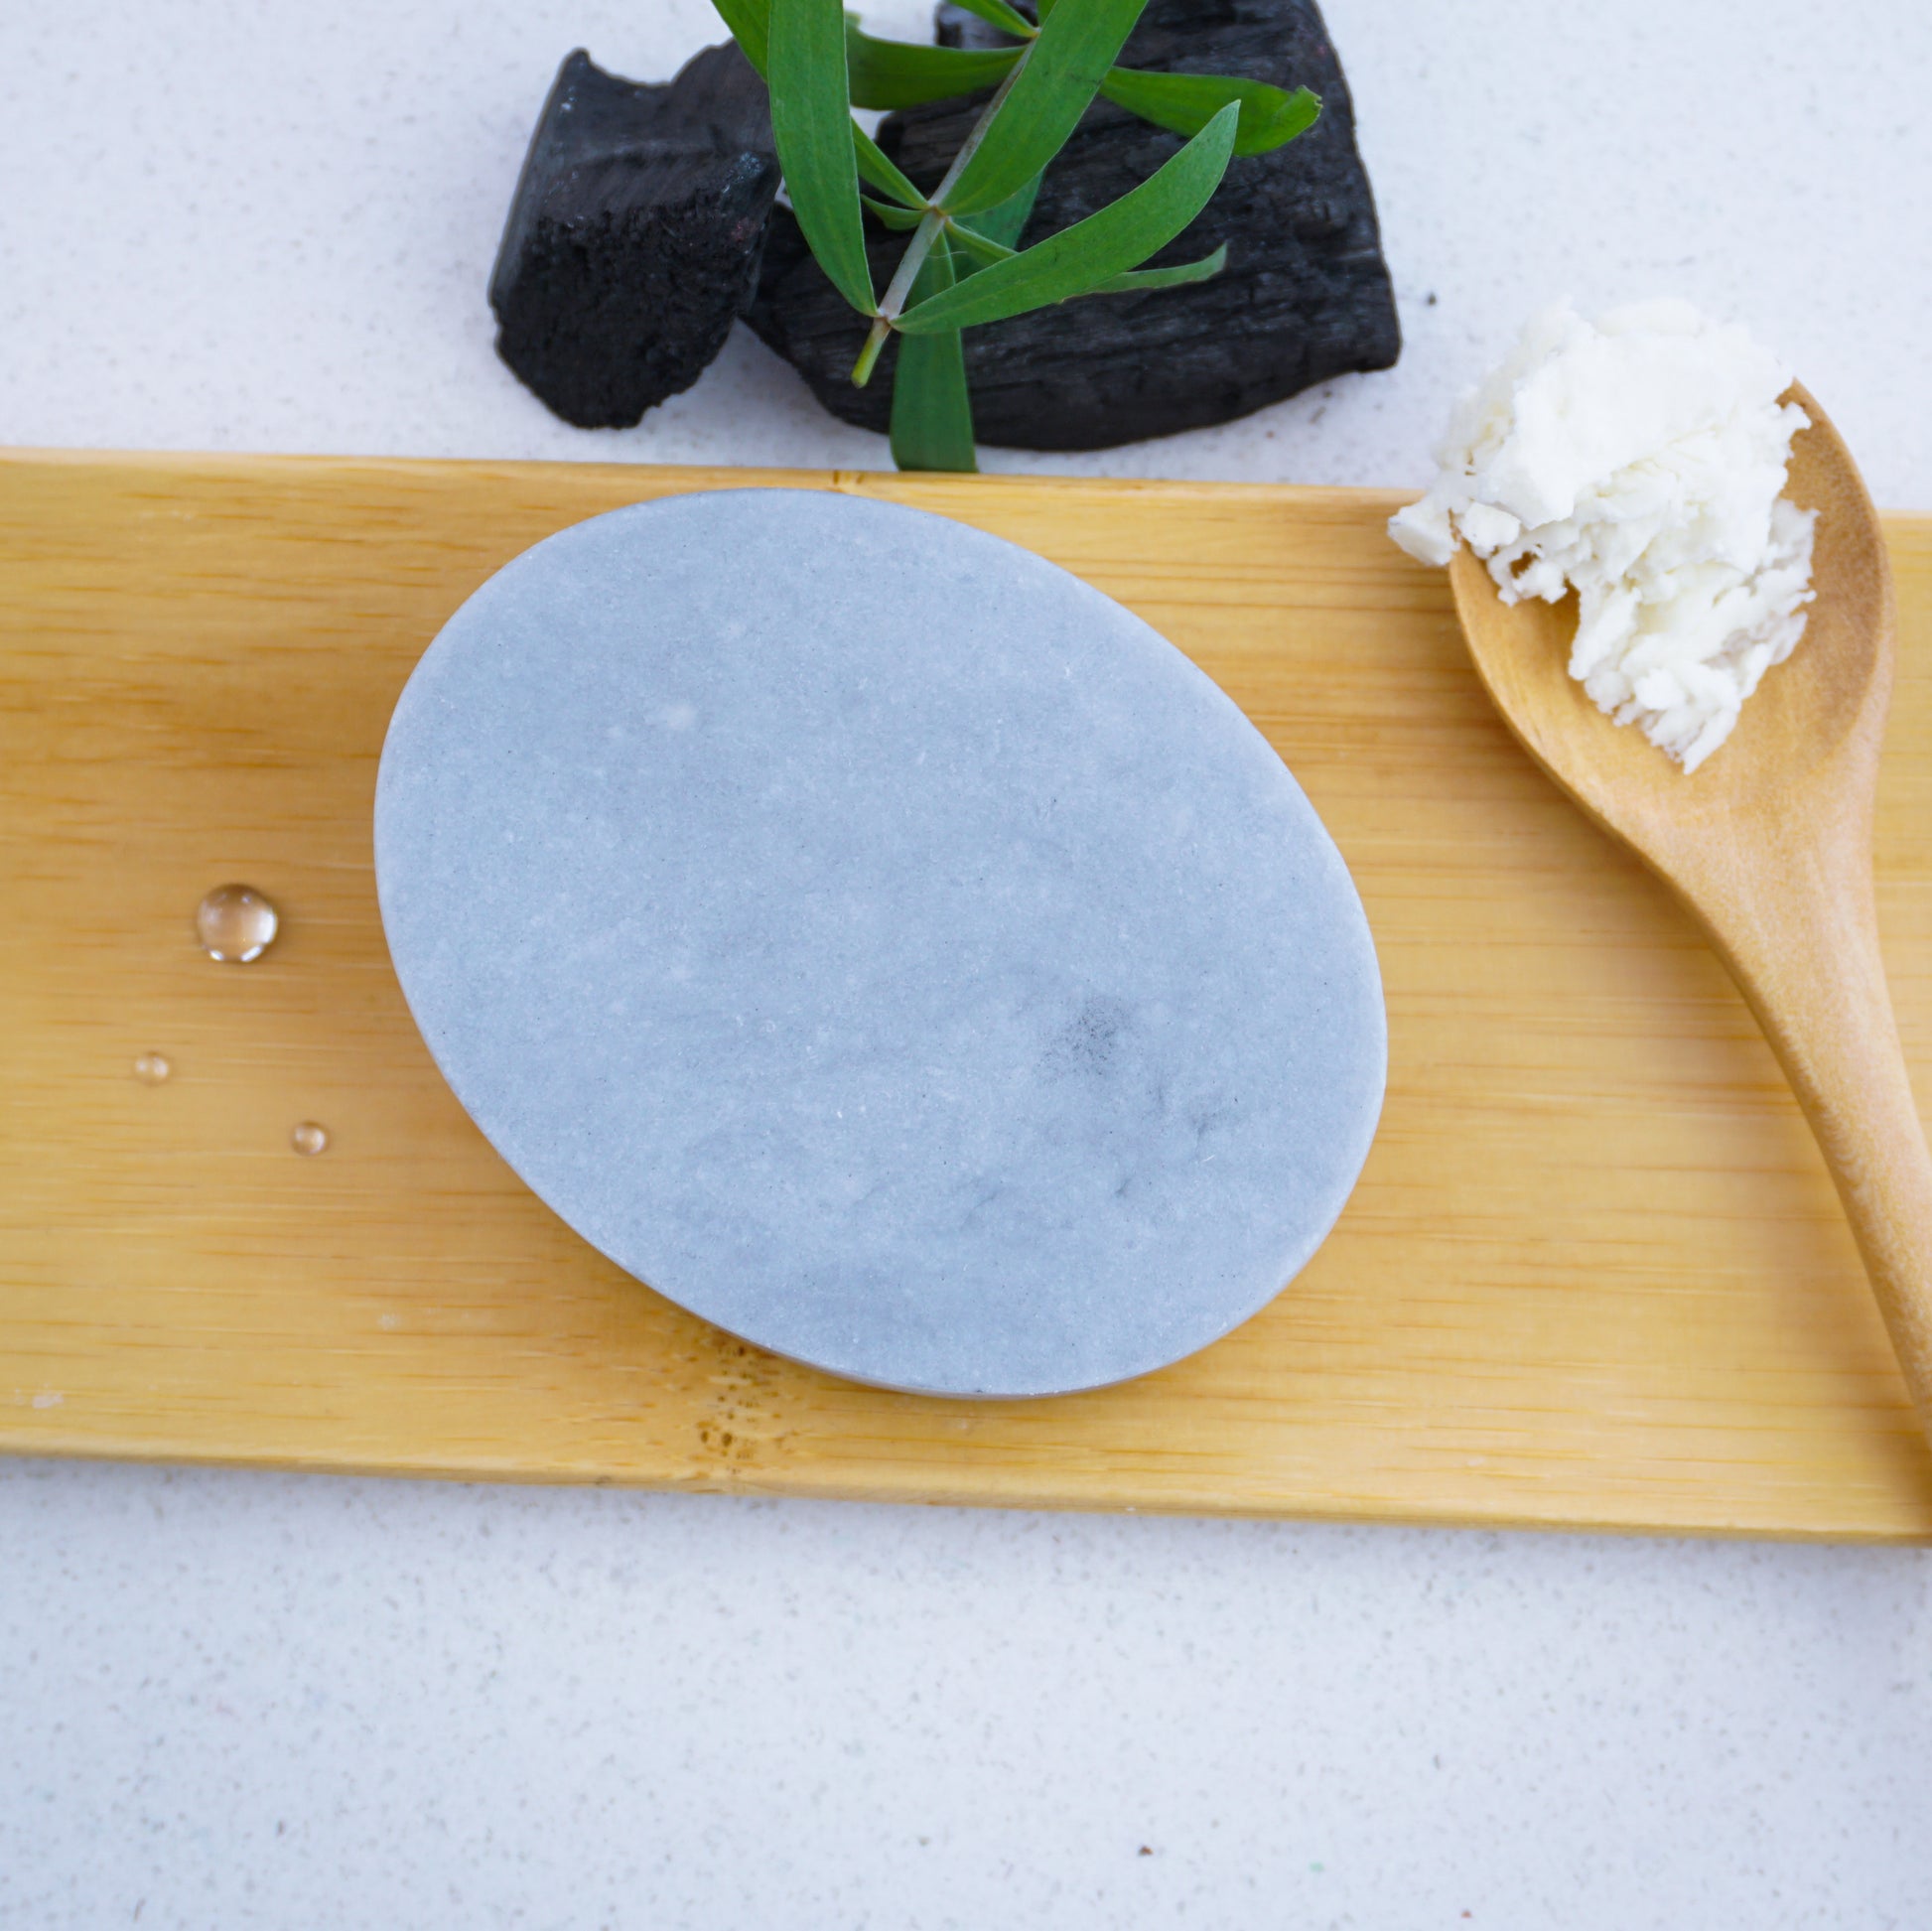 Washla Tea Tree and Charcoal shampoo bar sitting on bamboo tray with a spoonful of shea butter